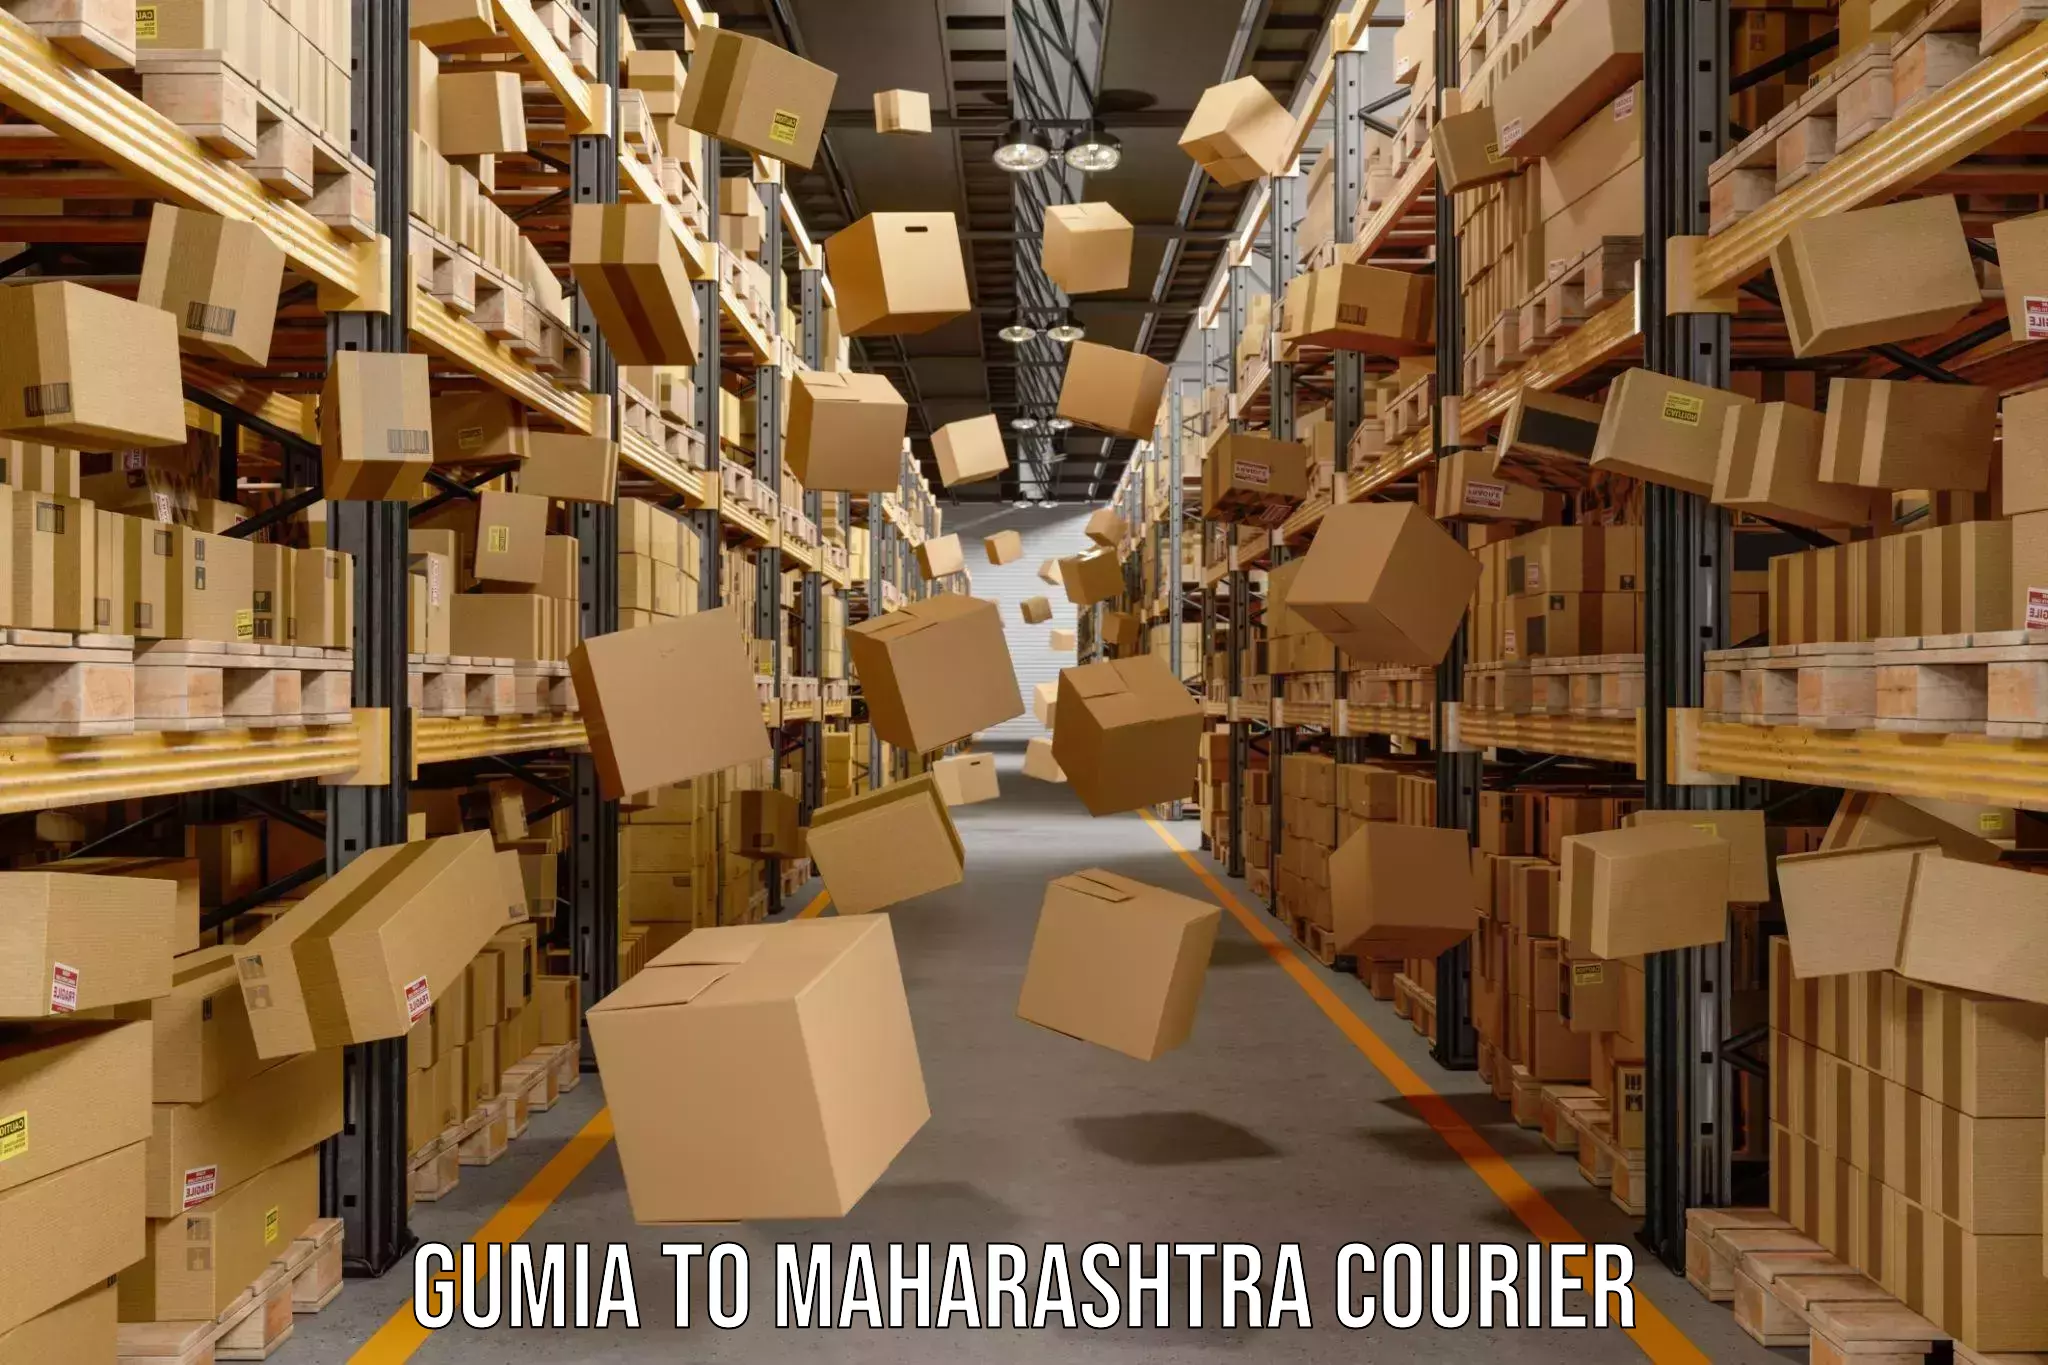 Courier service efficiency Gumia to Mumbai Port